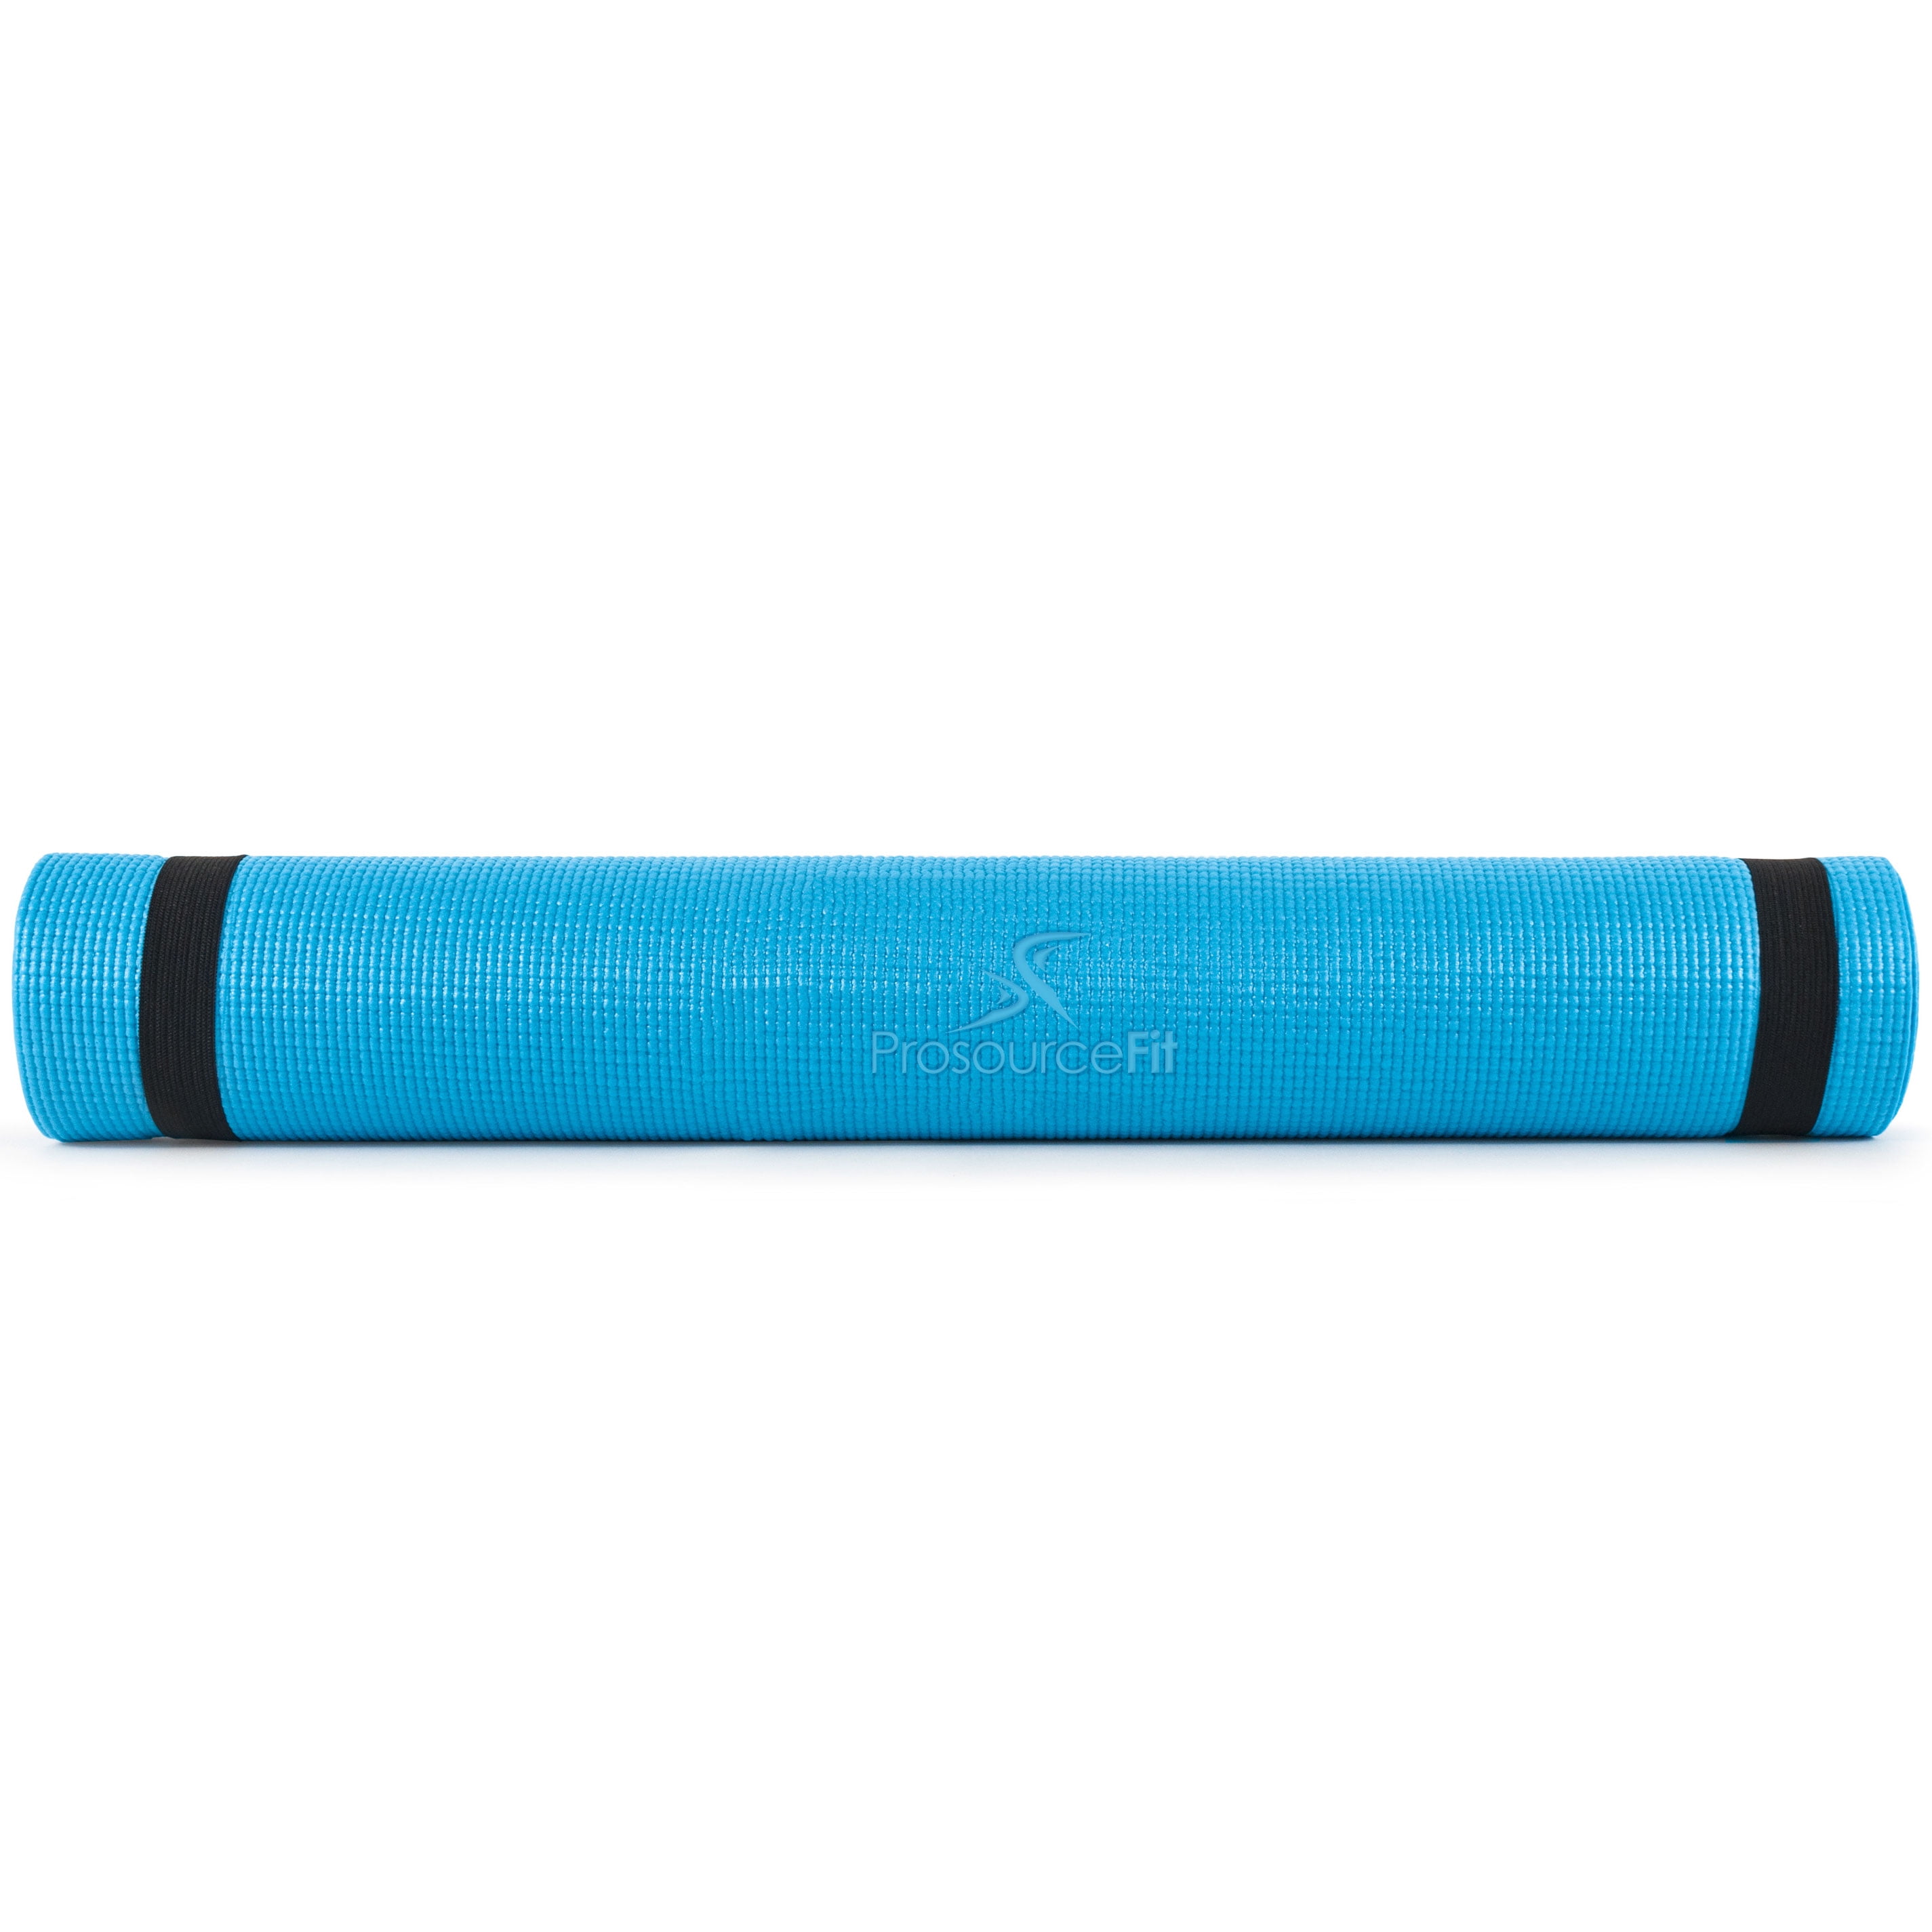 Classic Yoga Mat 1/8 Inch 3 ColorsDon't suffer through a yoga class with an  uncomfortable mat that's too short to perform poses properly. The 6-foot  length is ideal for taller users, so